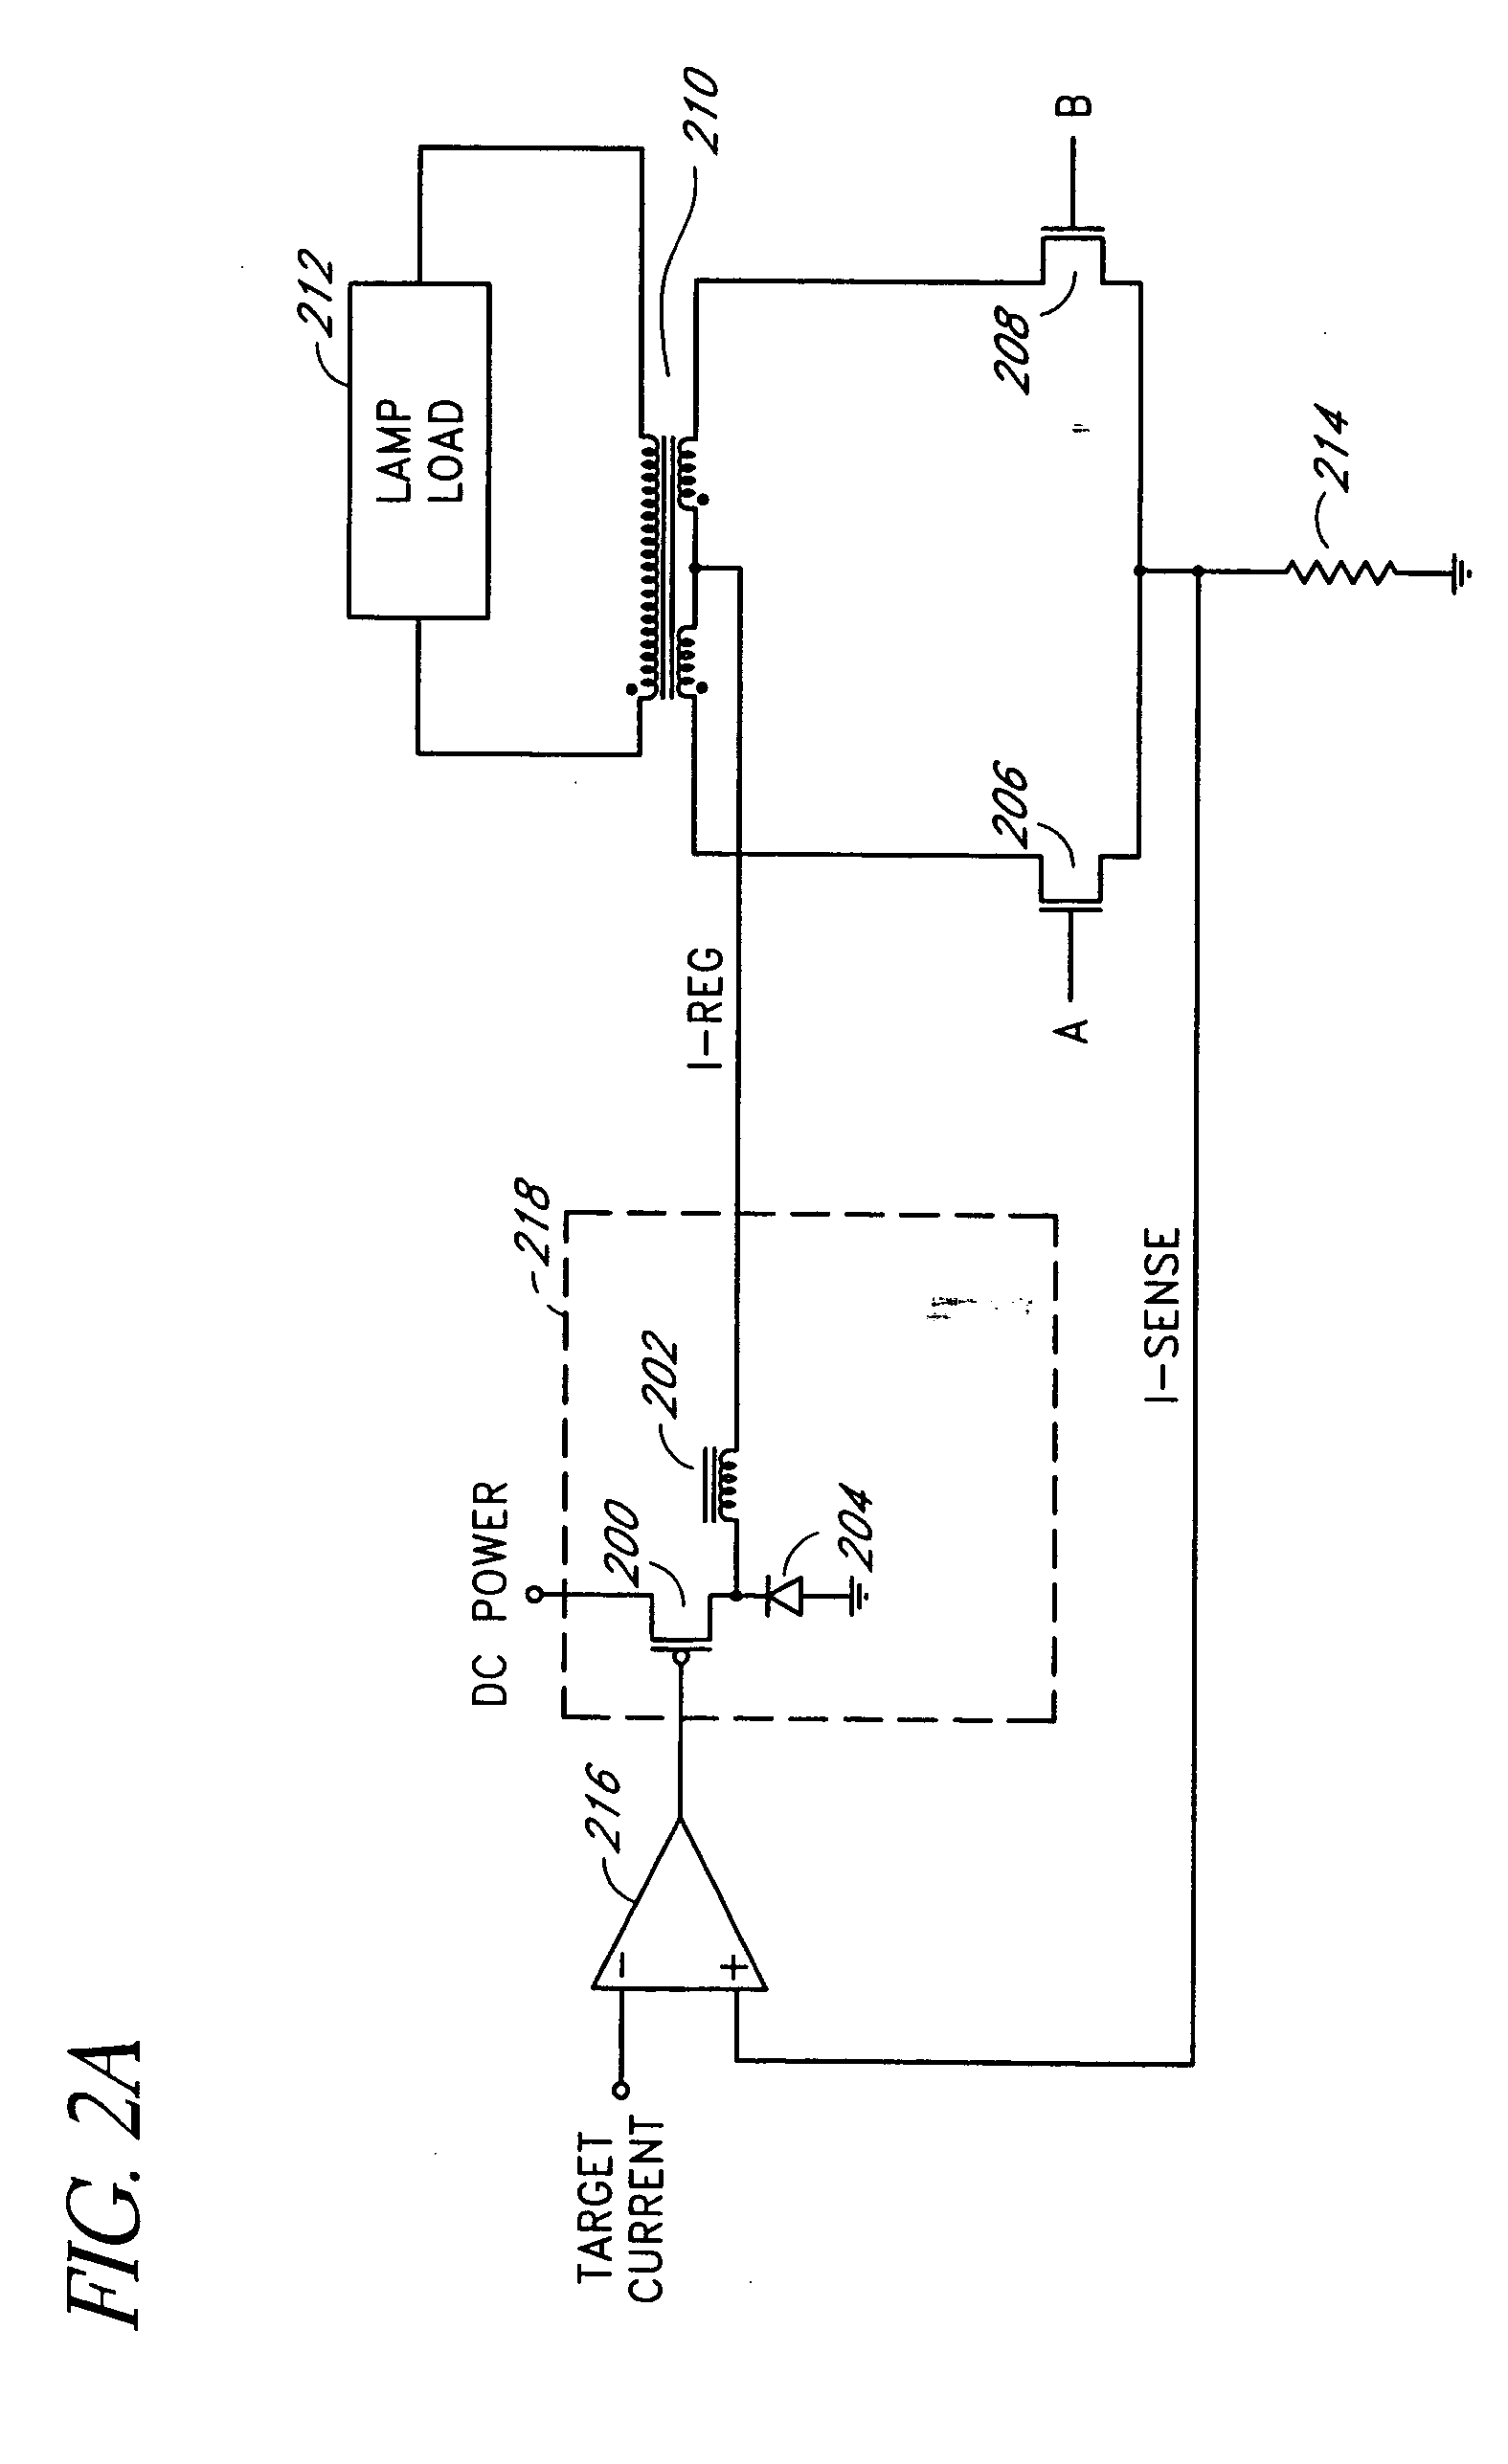 Method and apparatus to drive LED arrays using time sharing technique